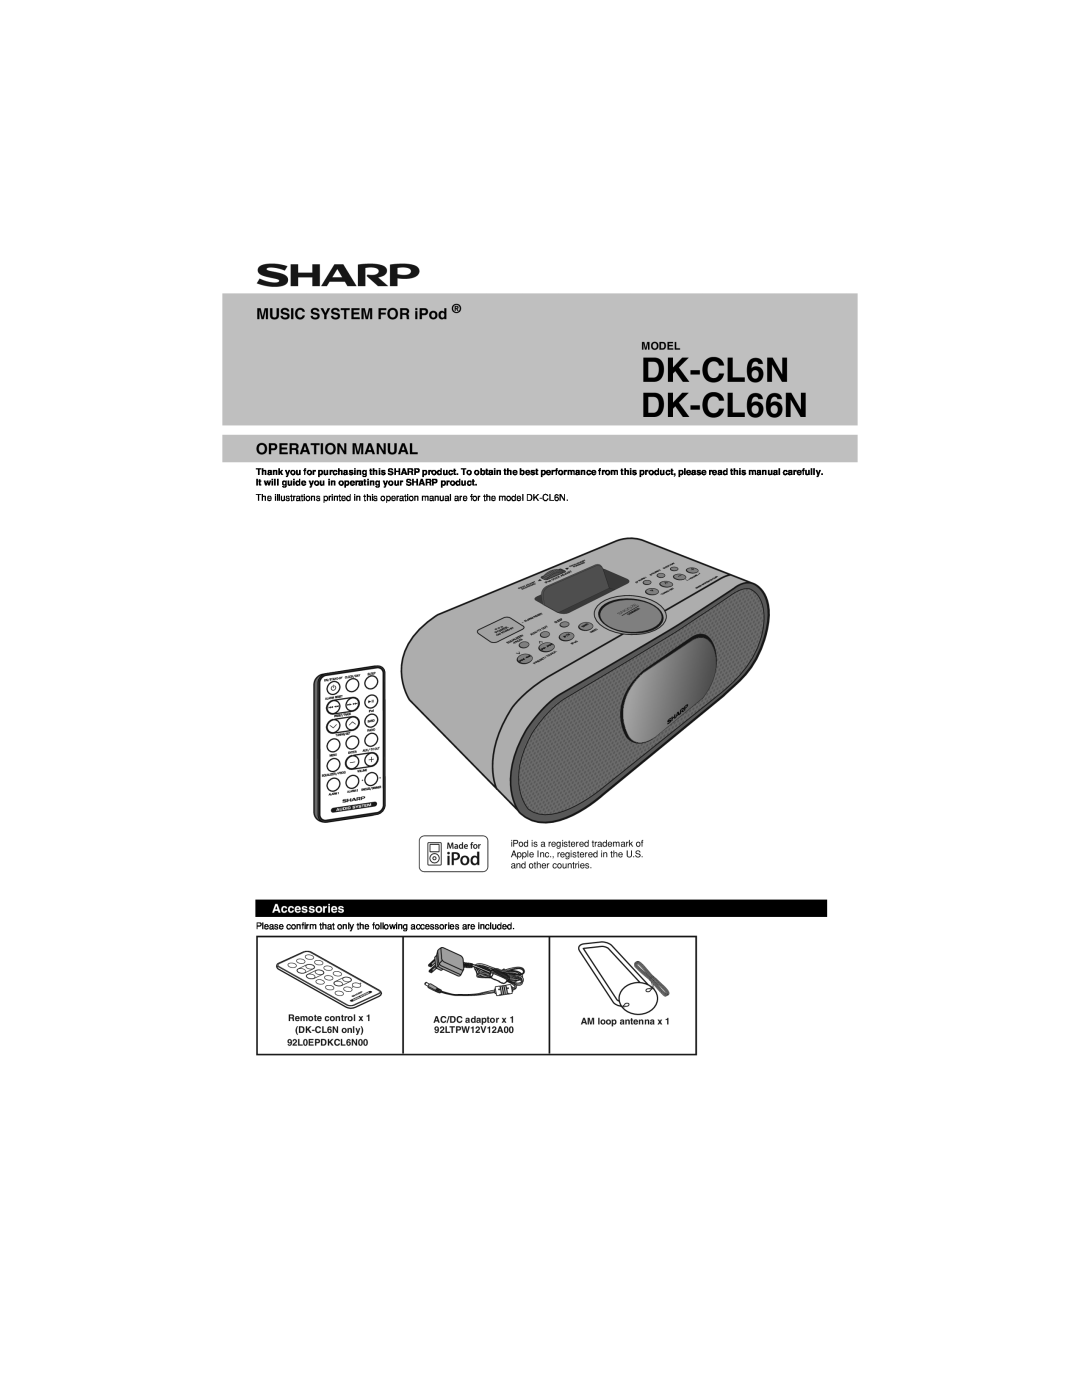 Sharp operation manual MUSIC SYSTEM FOR iPod, Accessories, DK-CL6N DK-CL66N, Model, AC/DC adaptor x 1 92LTPW12V12A00 